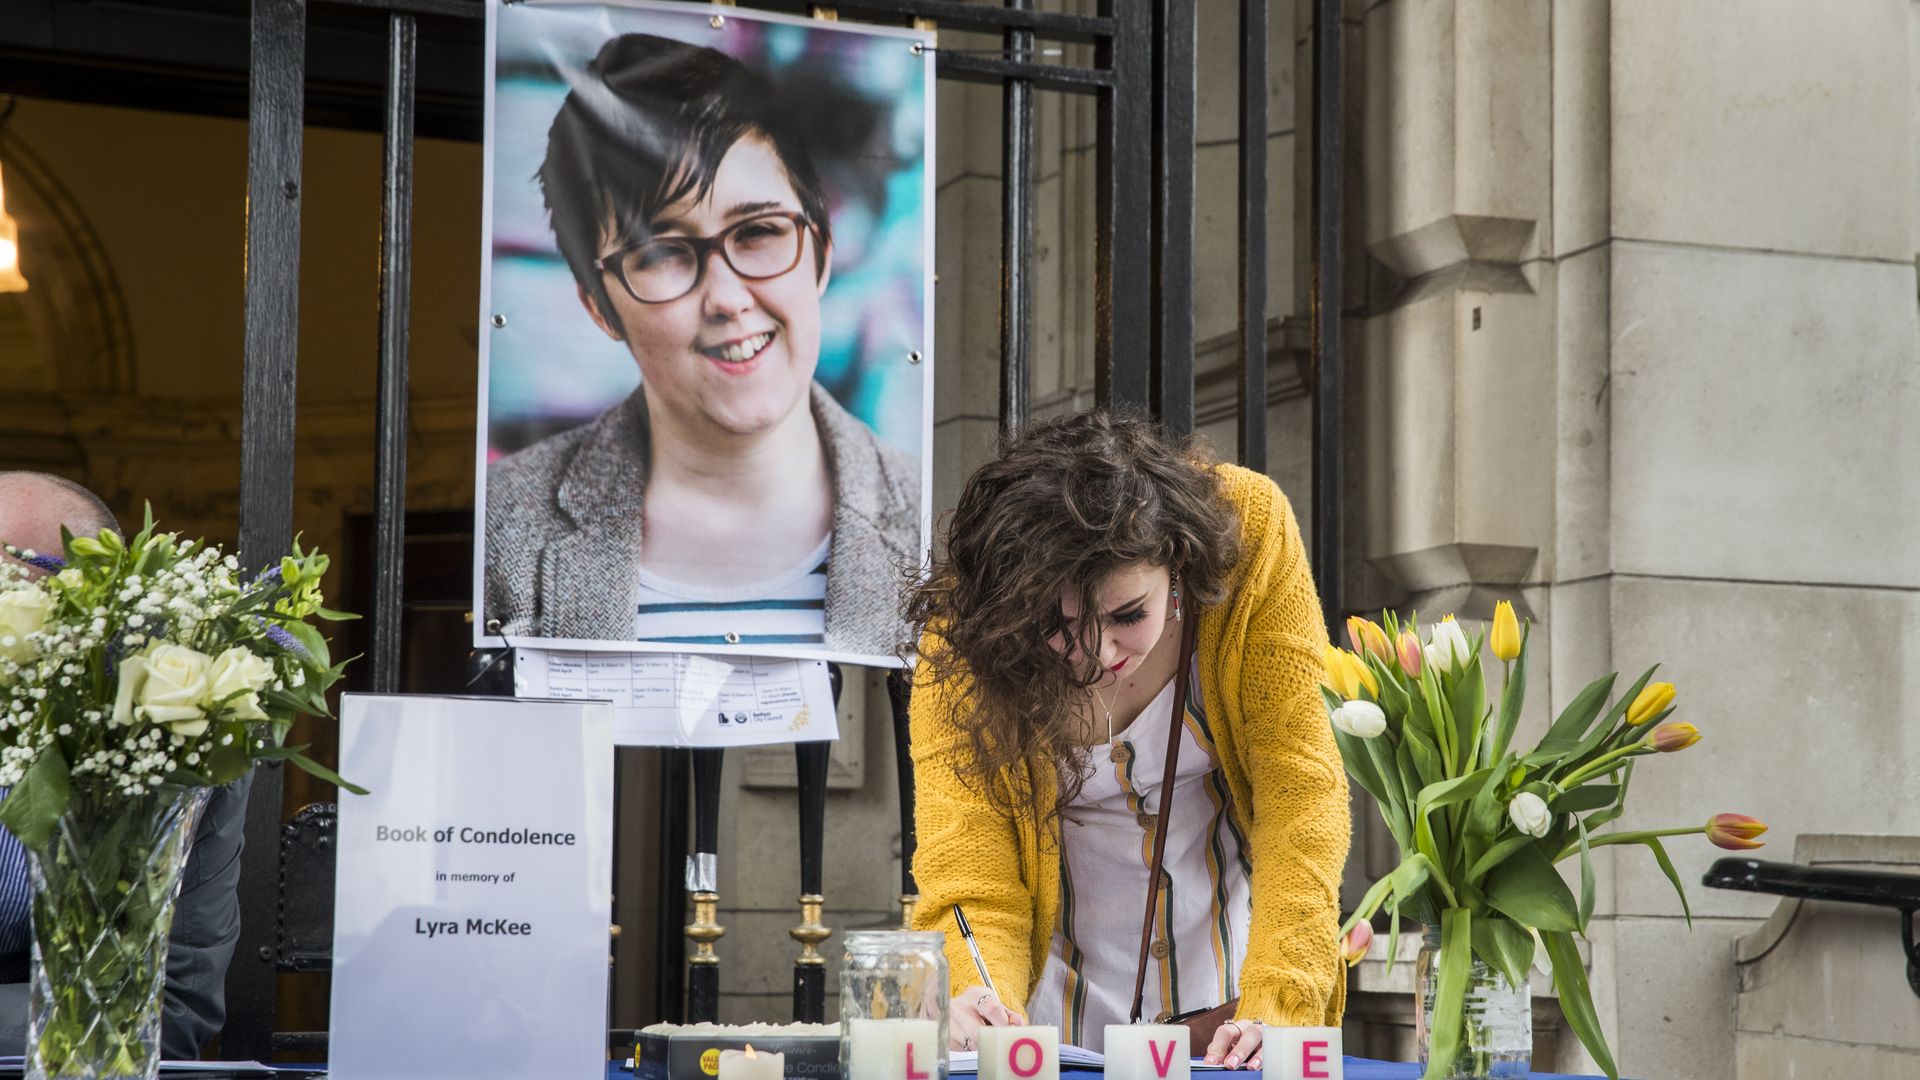 A book of condolence at Belfast City Hall in memory of murdered journalist Lyra McKee.